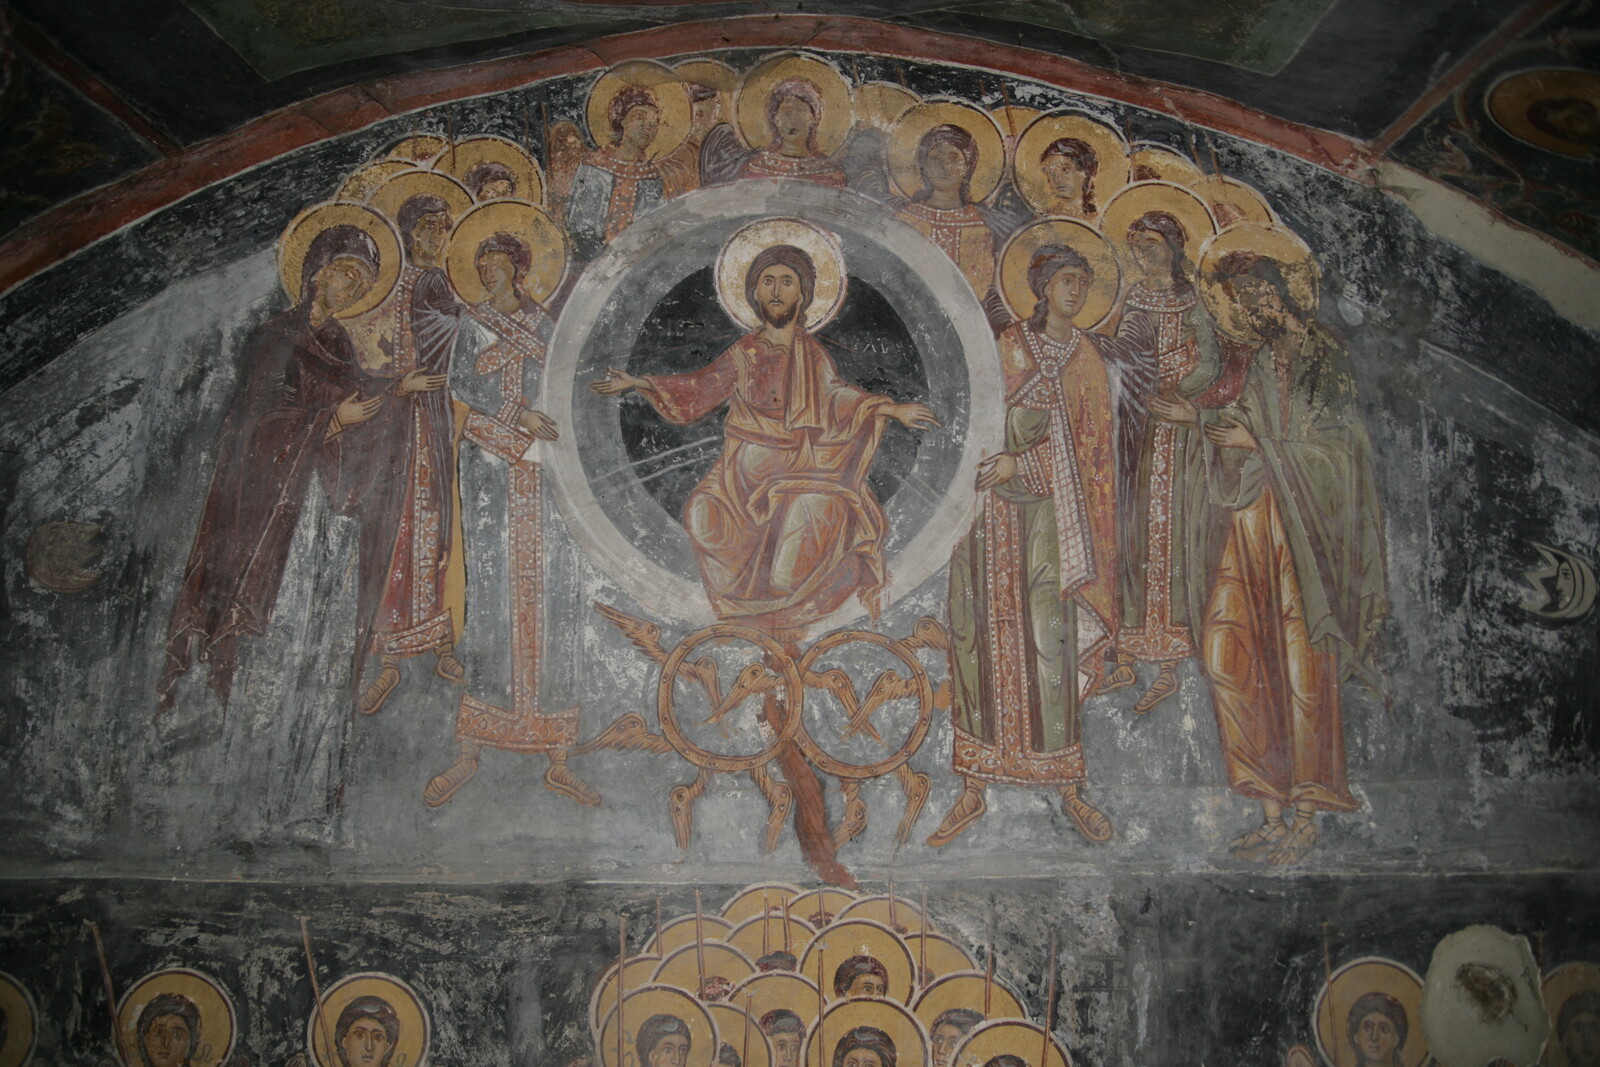 Christ, Virgin, John the Baptist and choirs of Angels